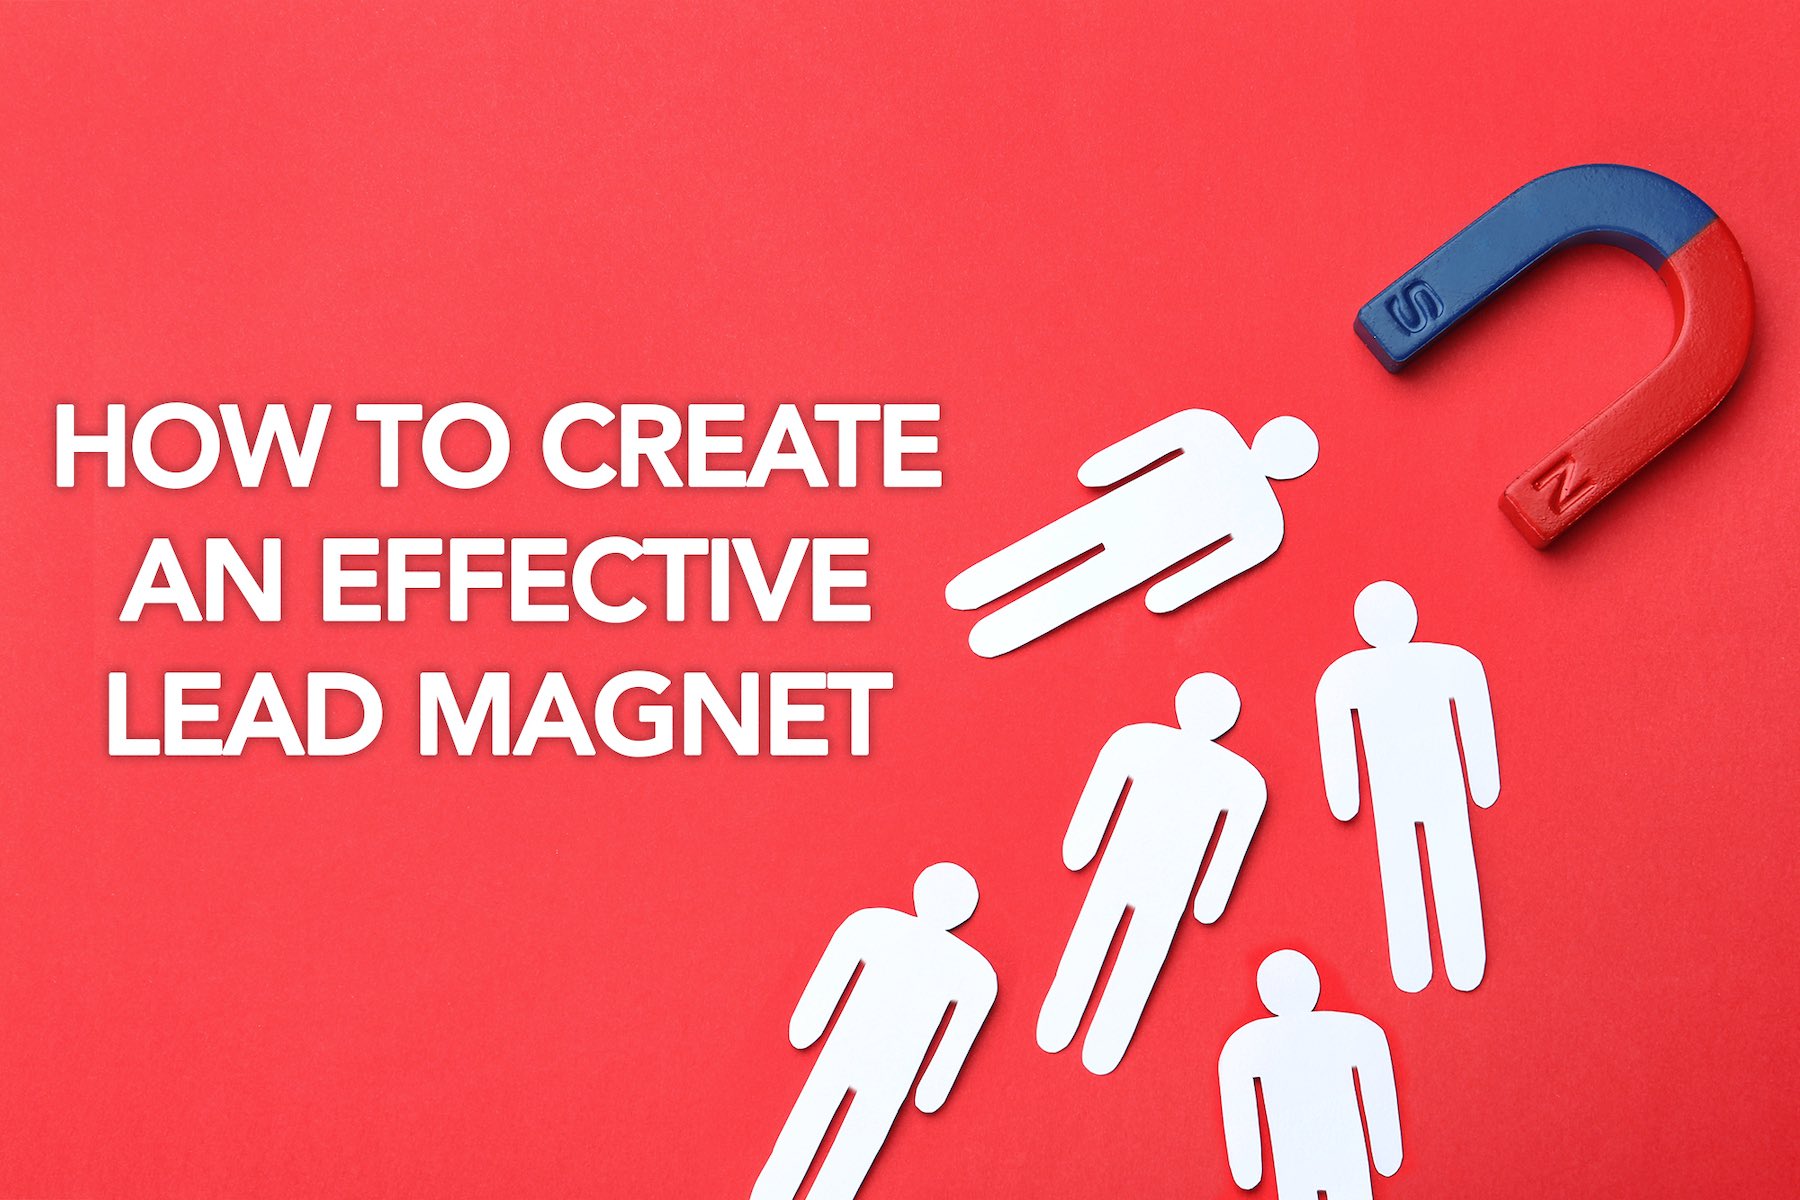 Image of magnet attracting leads